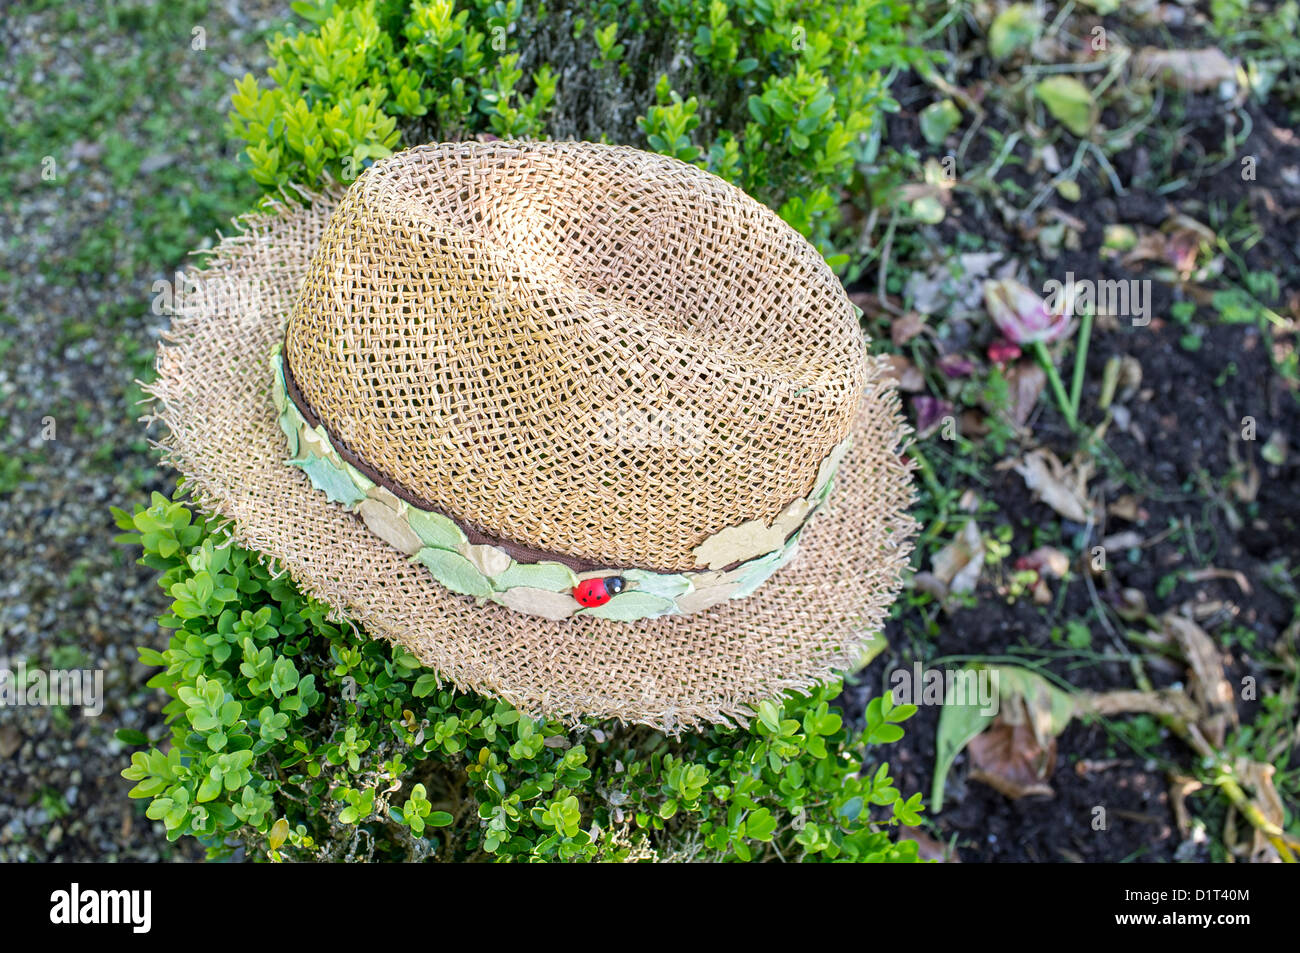 A Gardeners Straw Hat Sitting on a Clipped Box Hedge Stock Photo